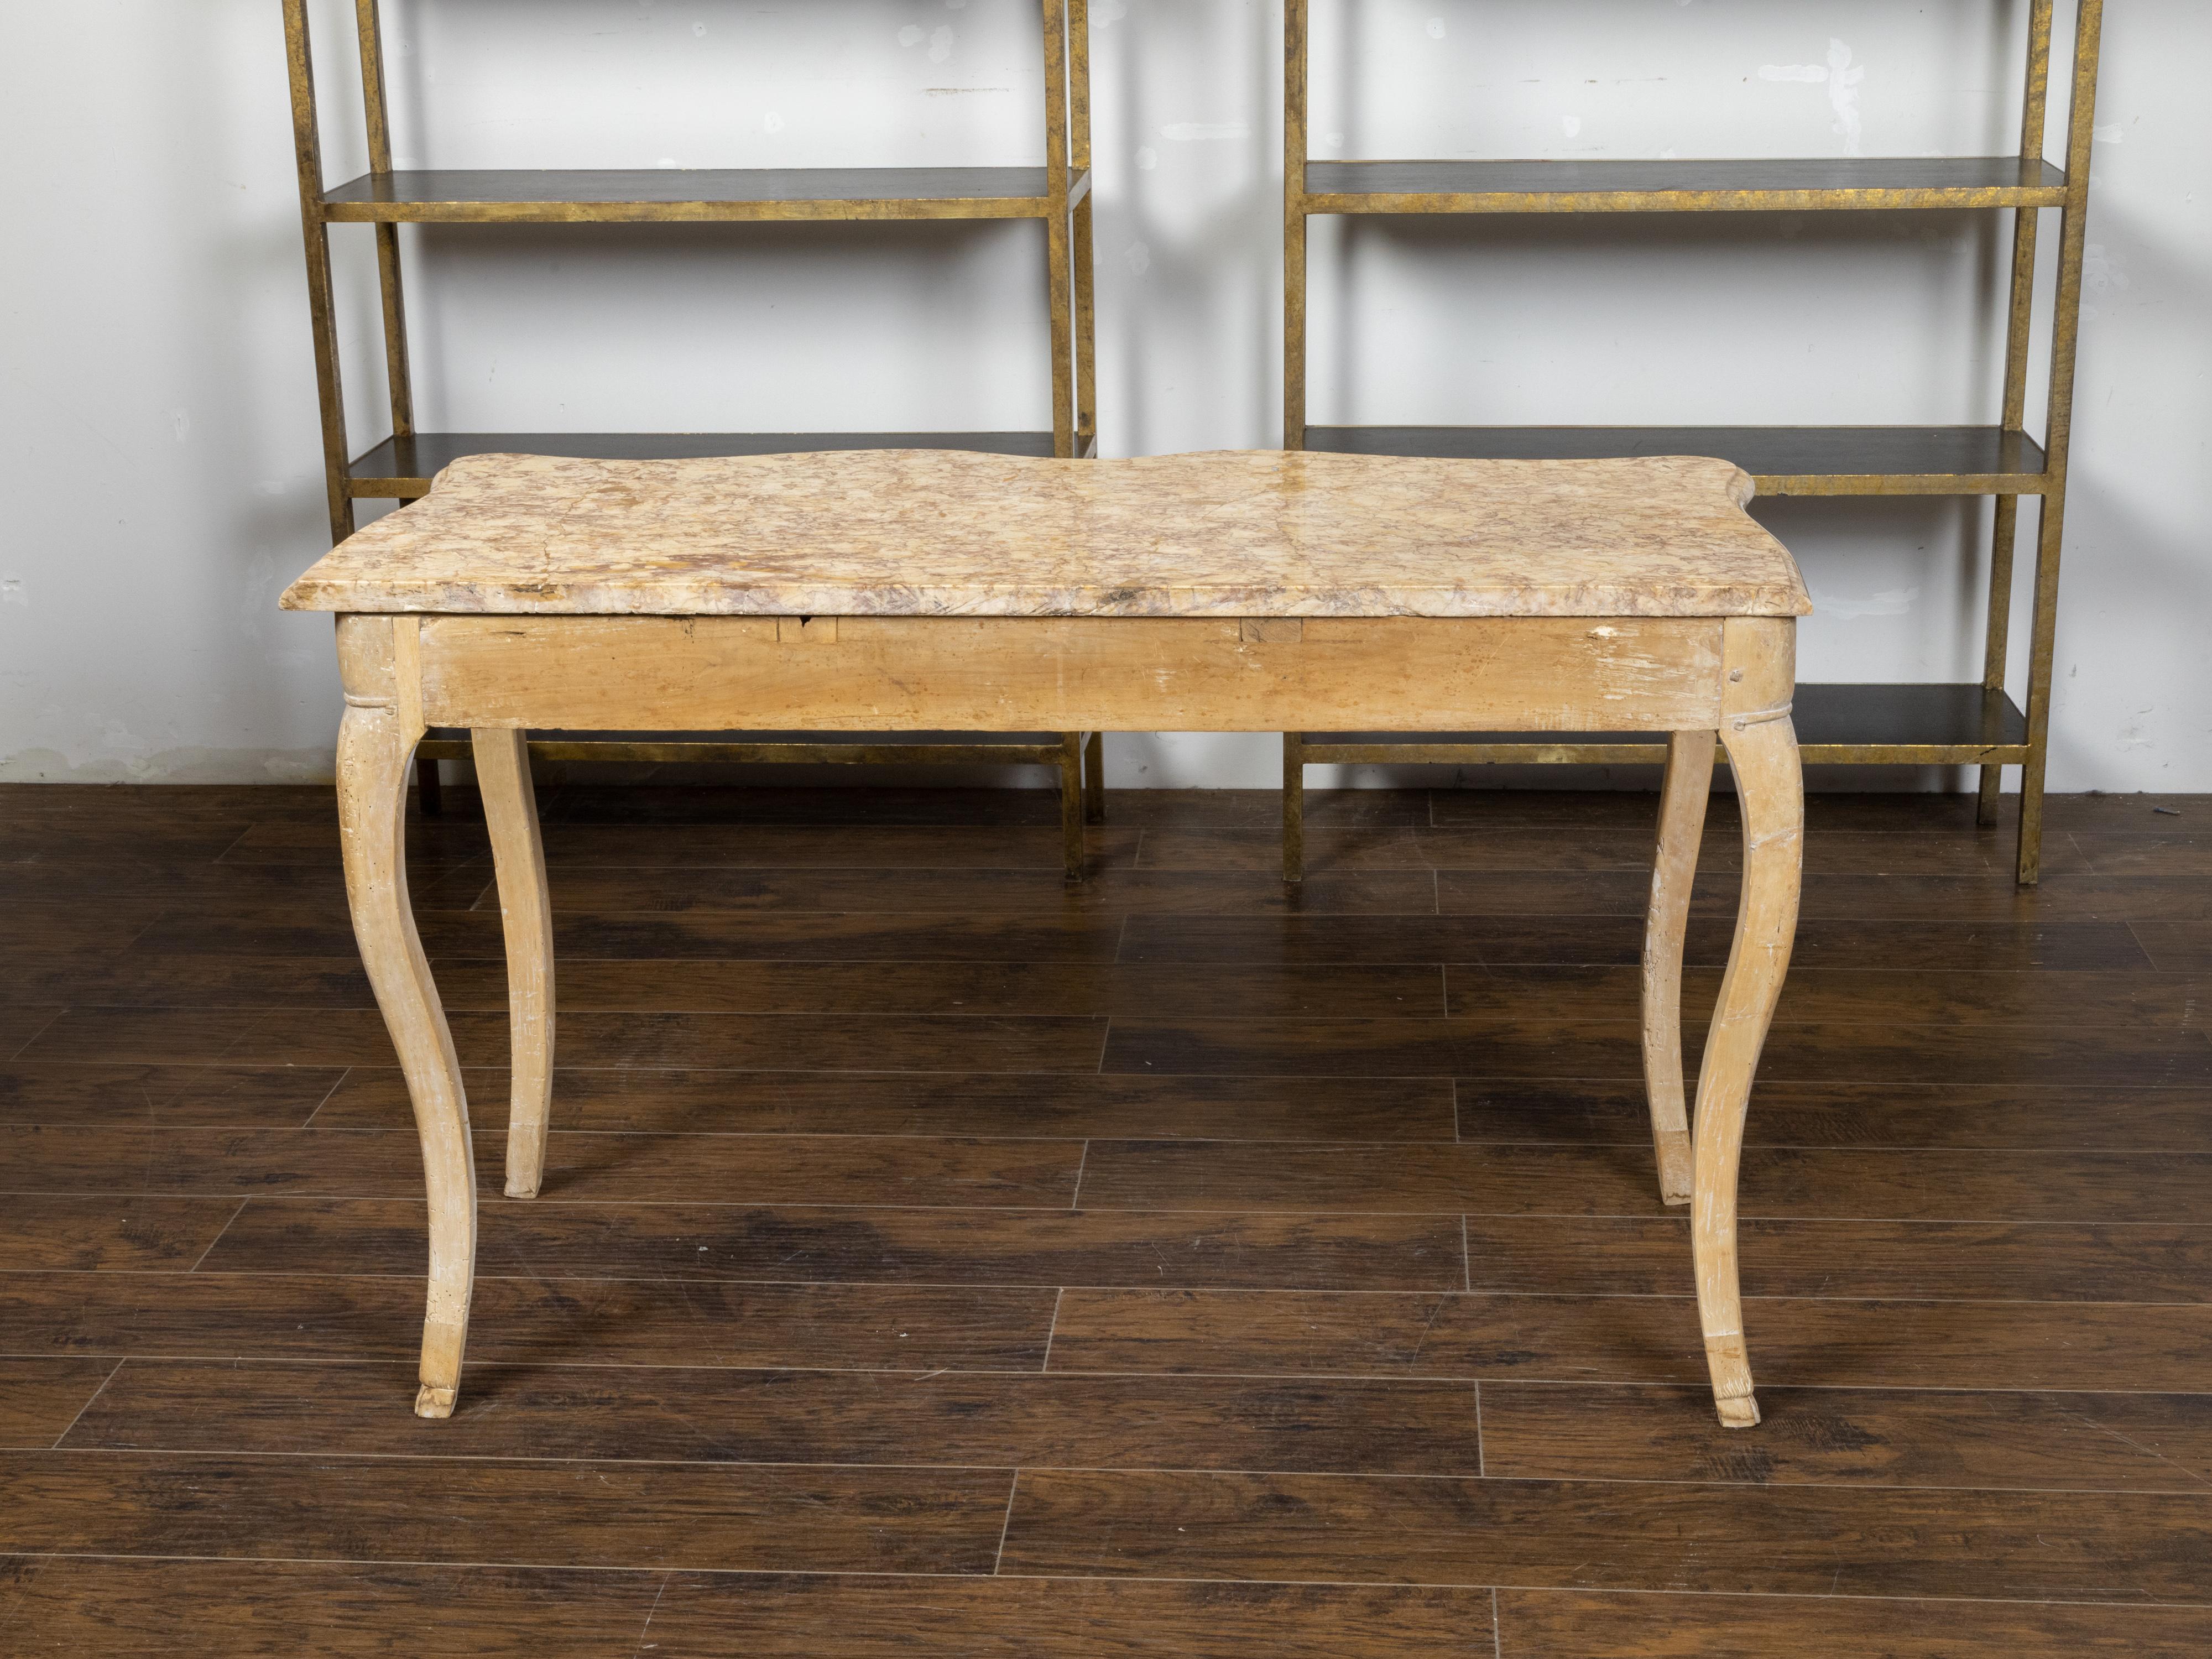 French Rococo 18th Century Beech Wood Marble Top Console Table with Carved Apron For Sale 1